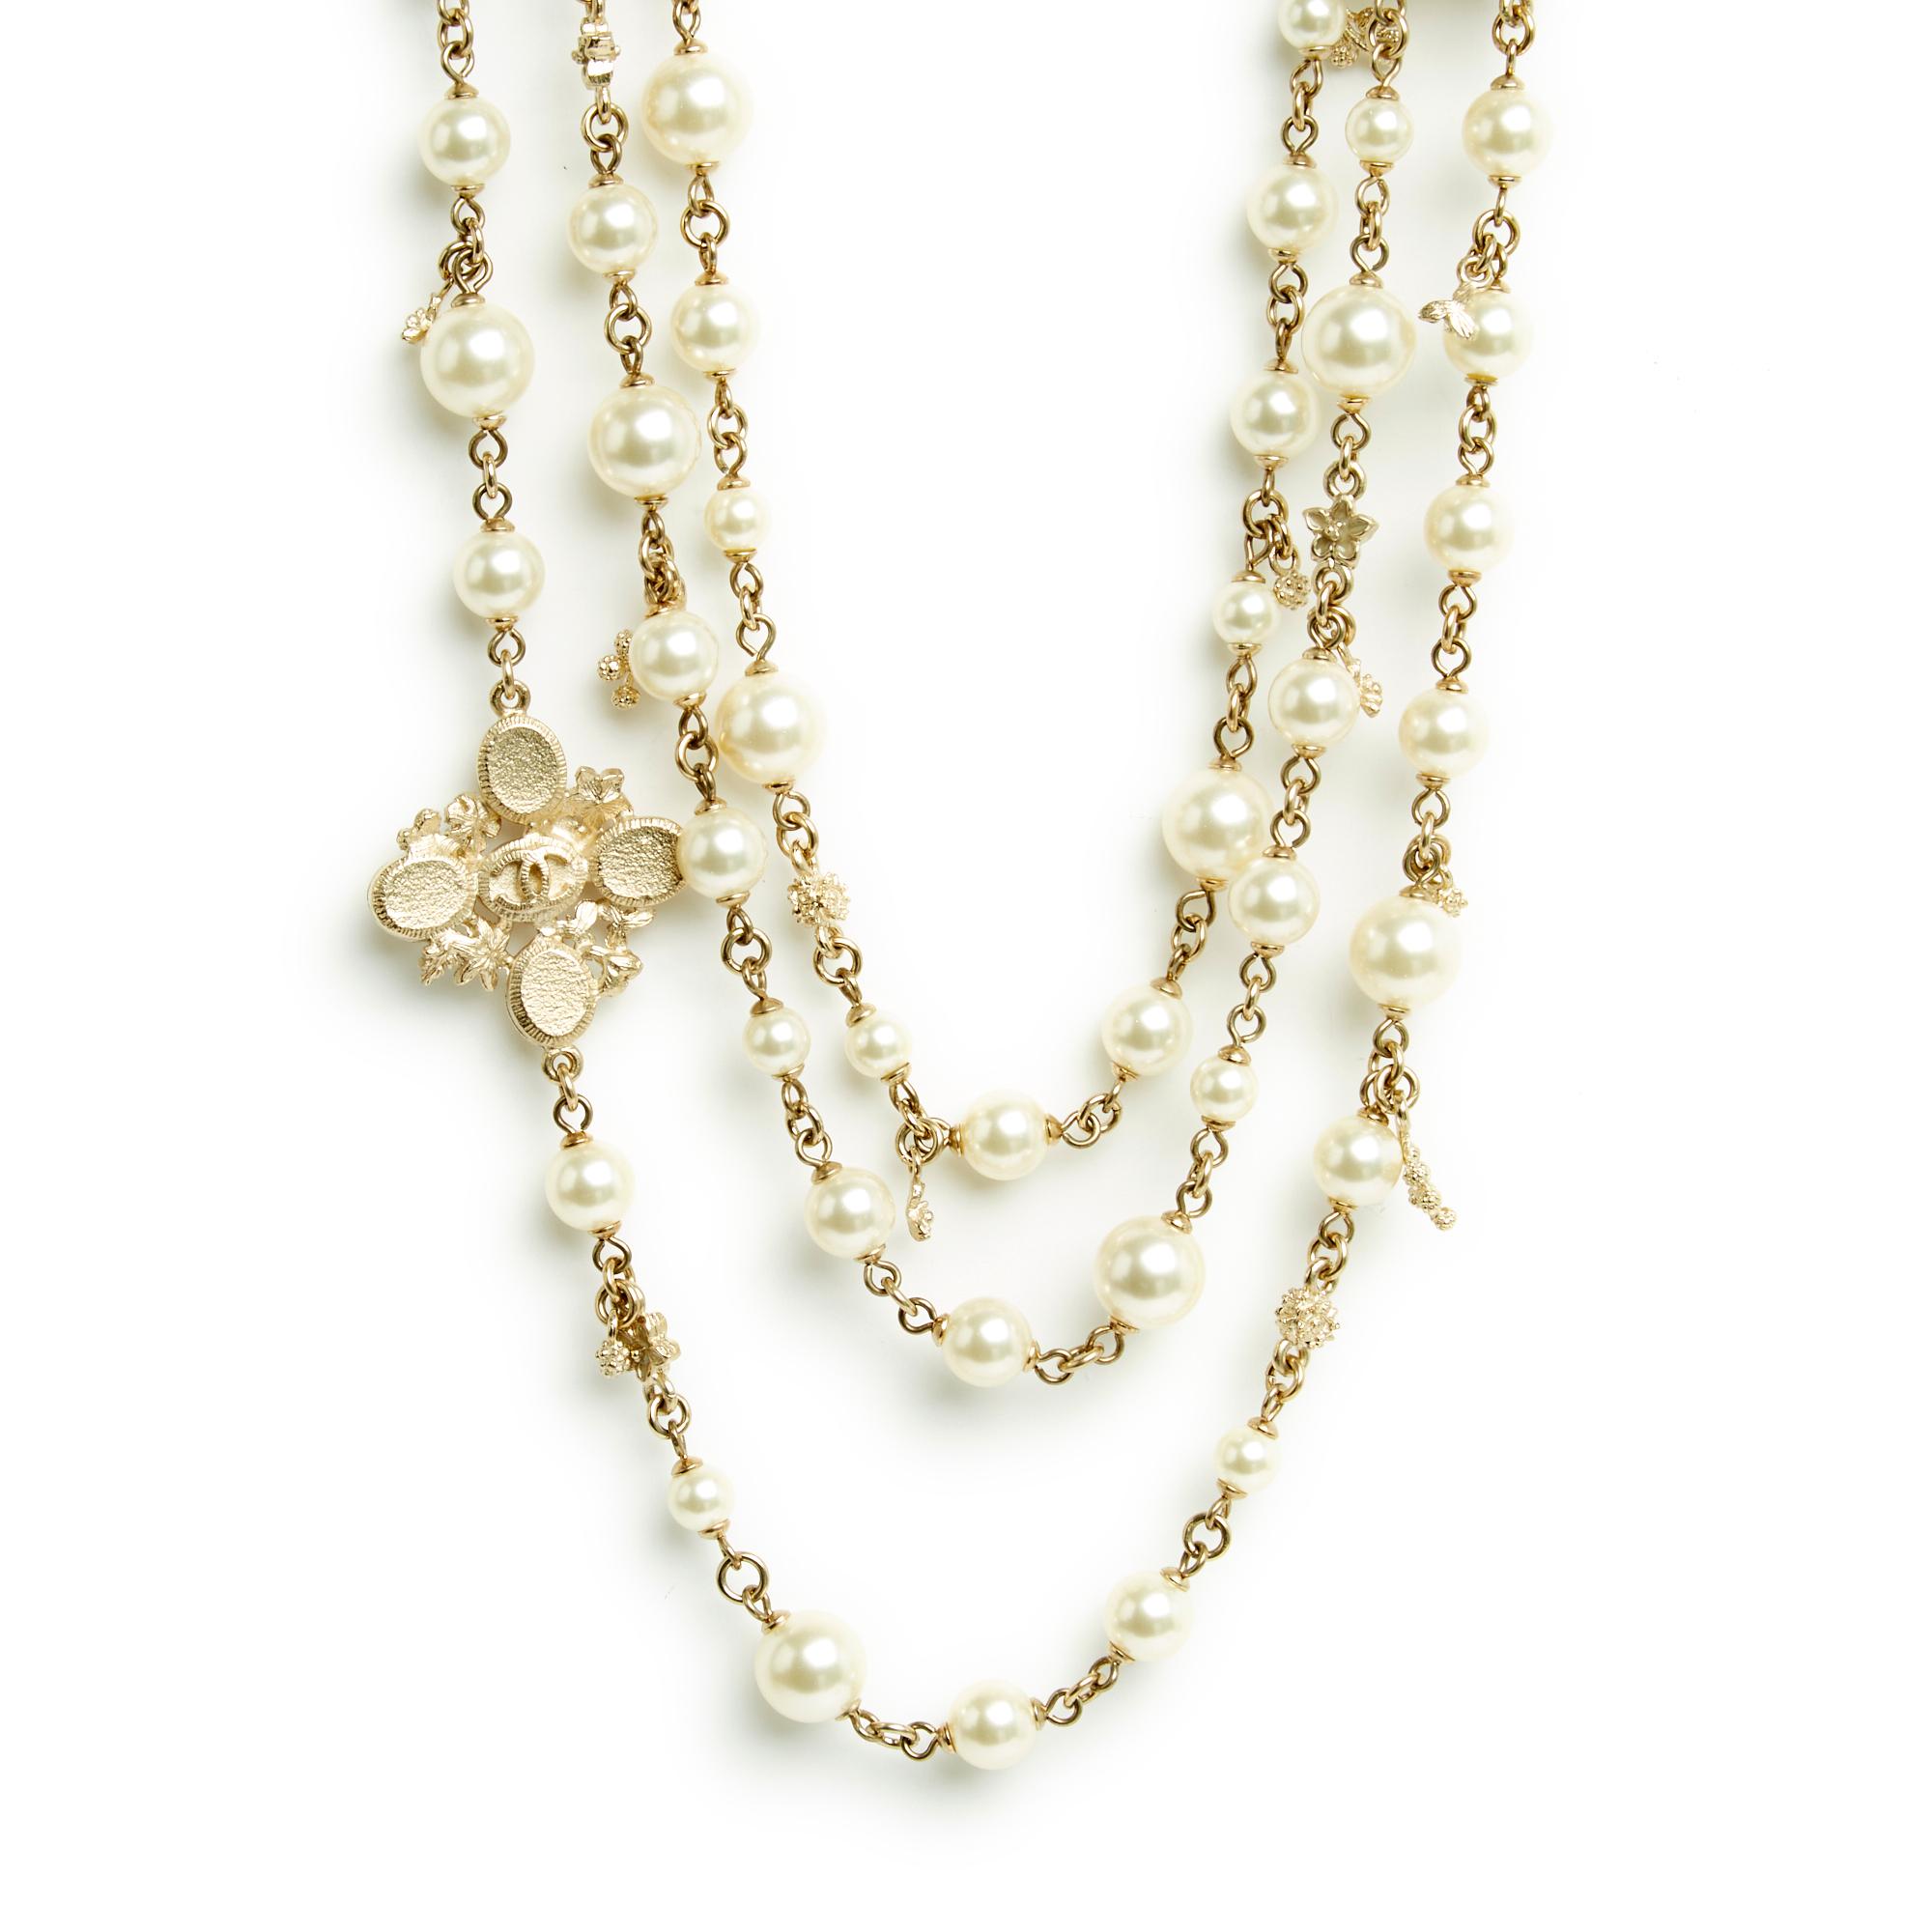 Chanel Pre Fall 2015 Paris Salzburg Pearls string necklace In Excellent Condition For Sale In PARIS, FR